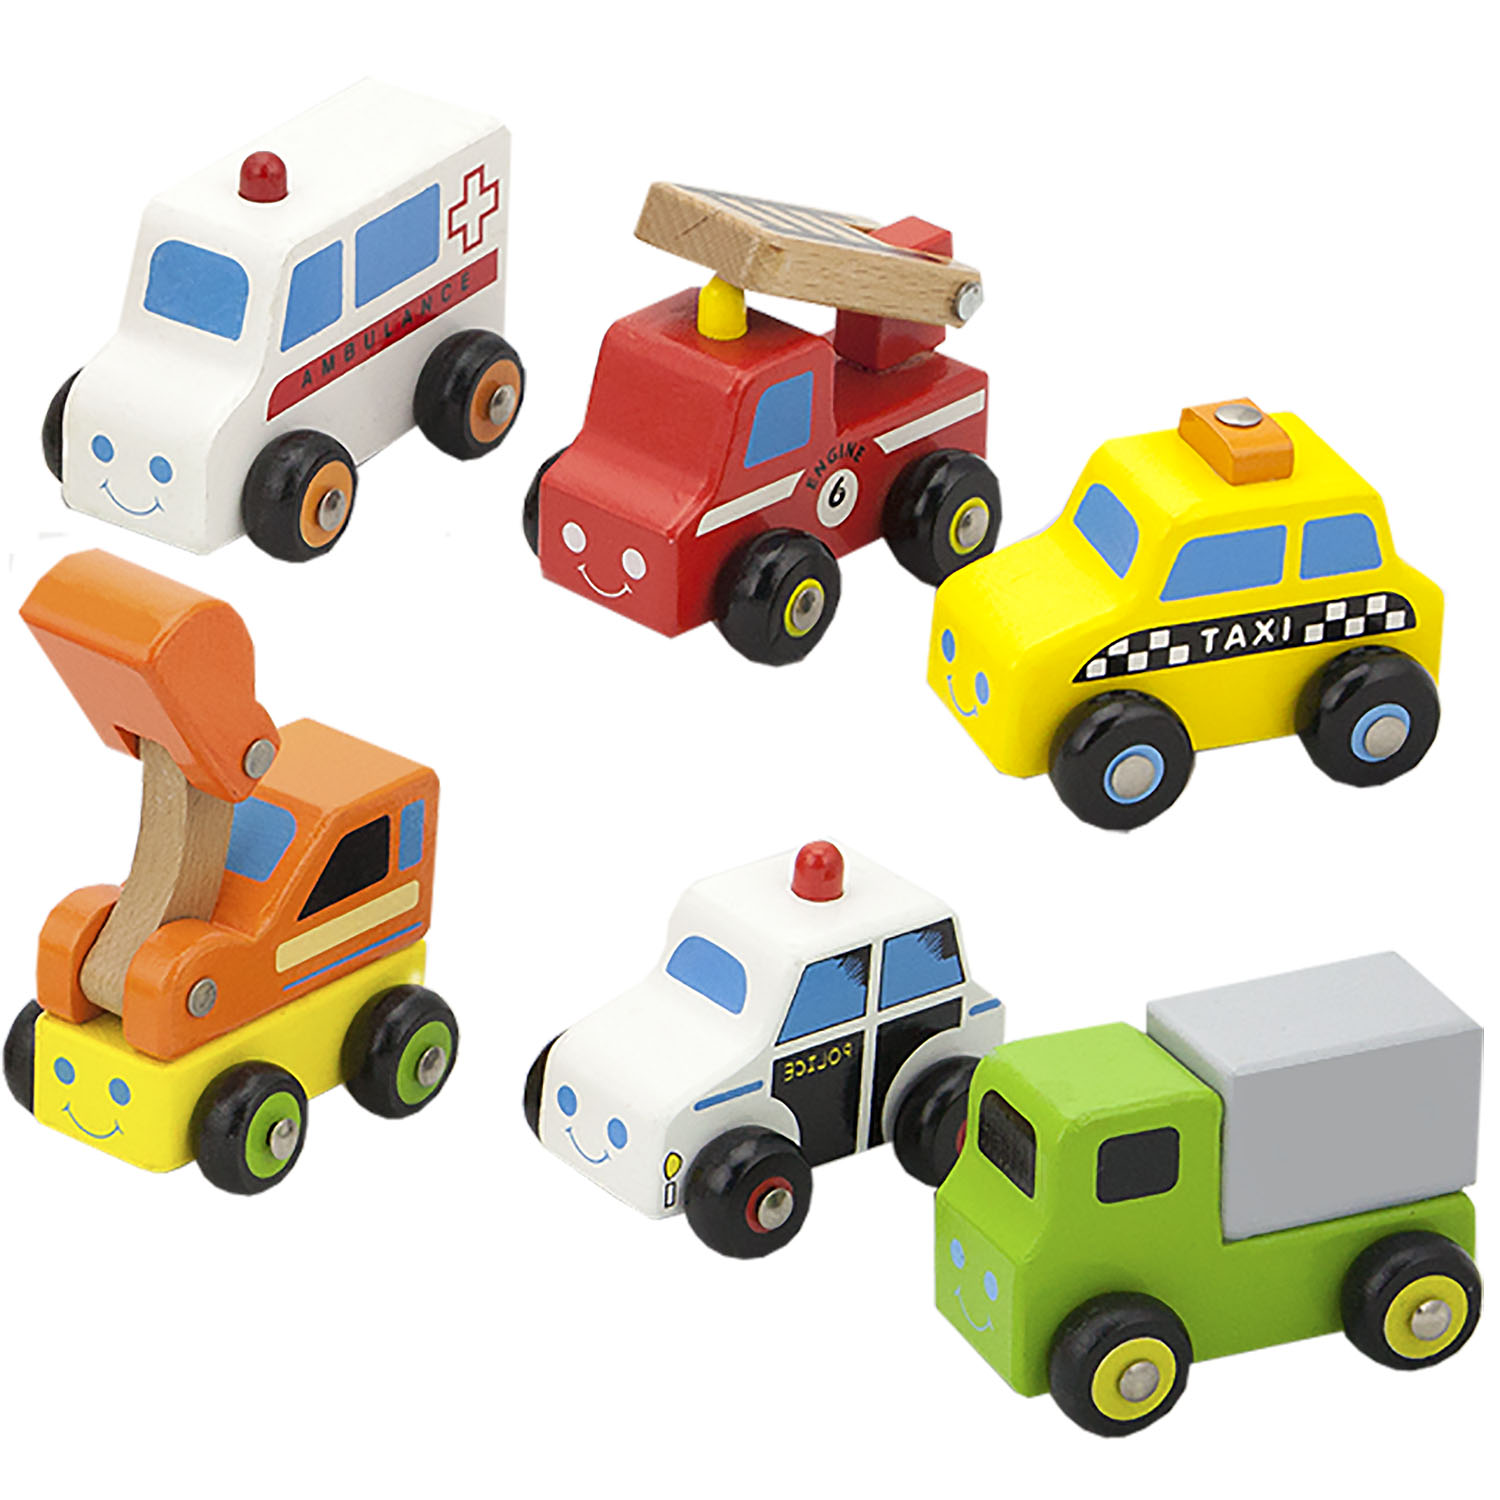 Wooden Toys for Kids: What Makes Them Great – The Minnie Co